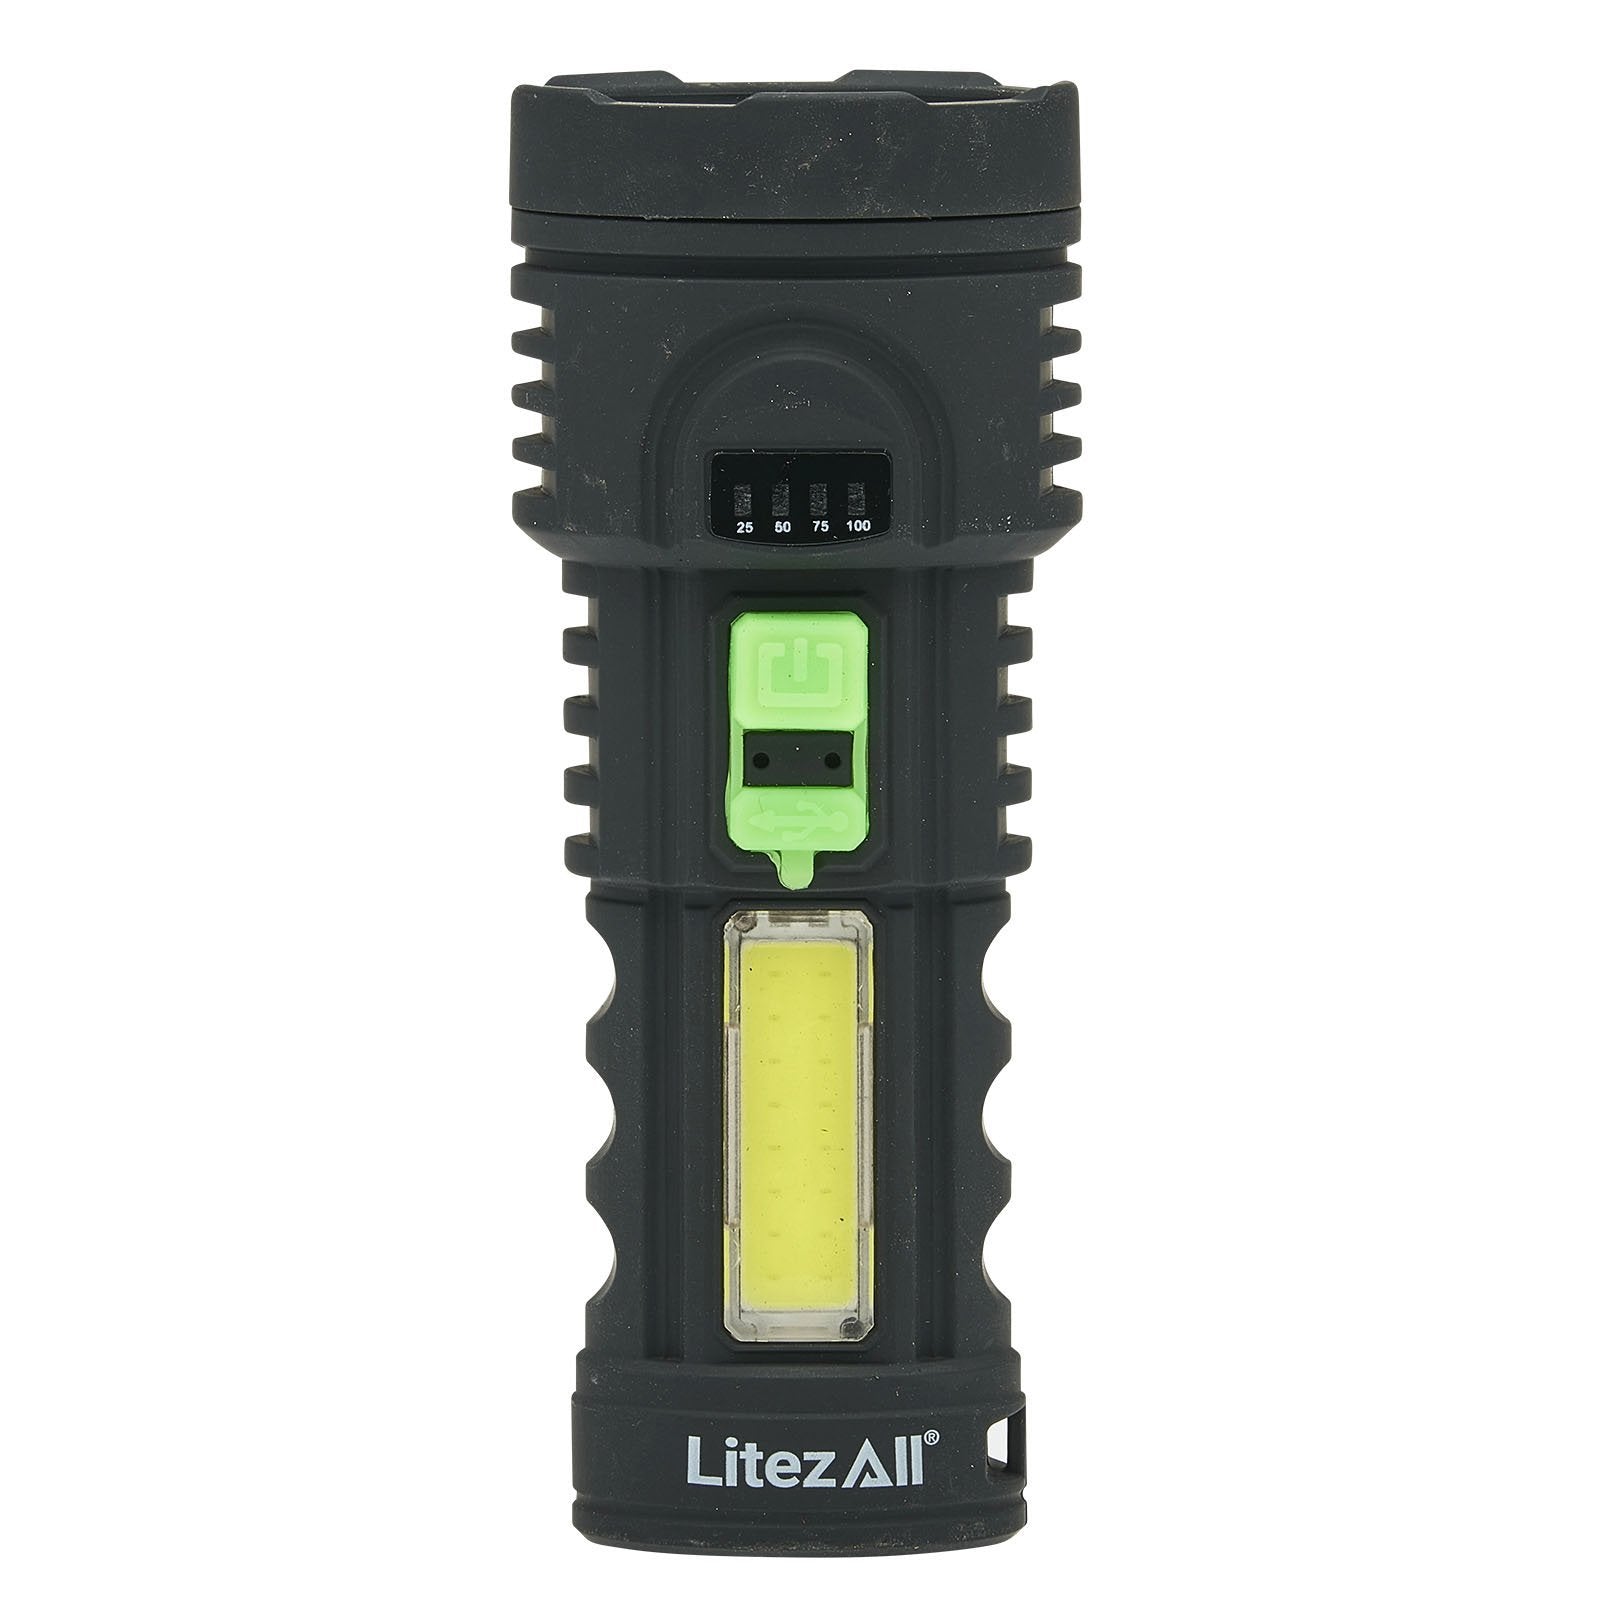 LitezAll TPR Coated Rechargeable Flashlight with Work Light - LitezAll - Tactical Flashlights - 14